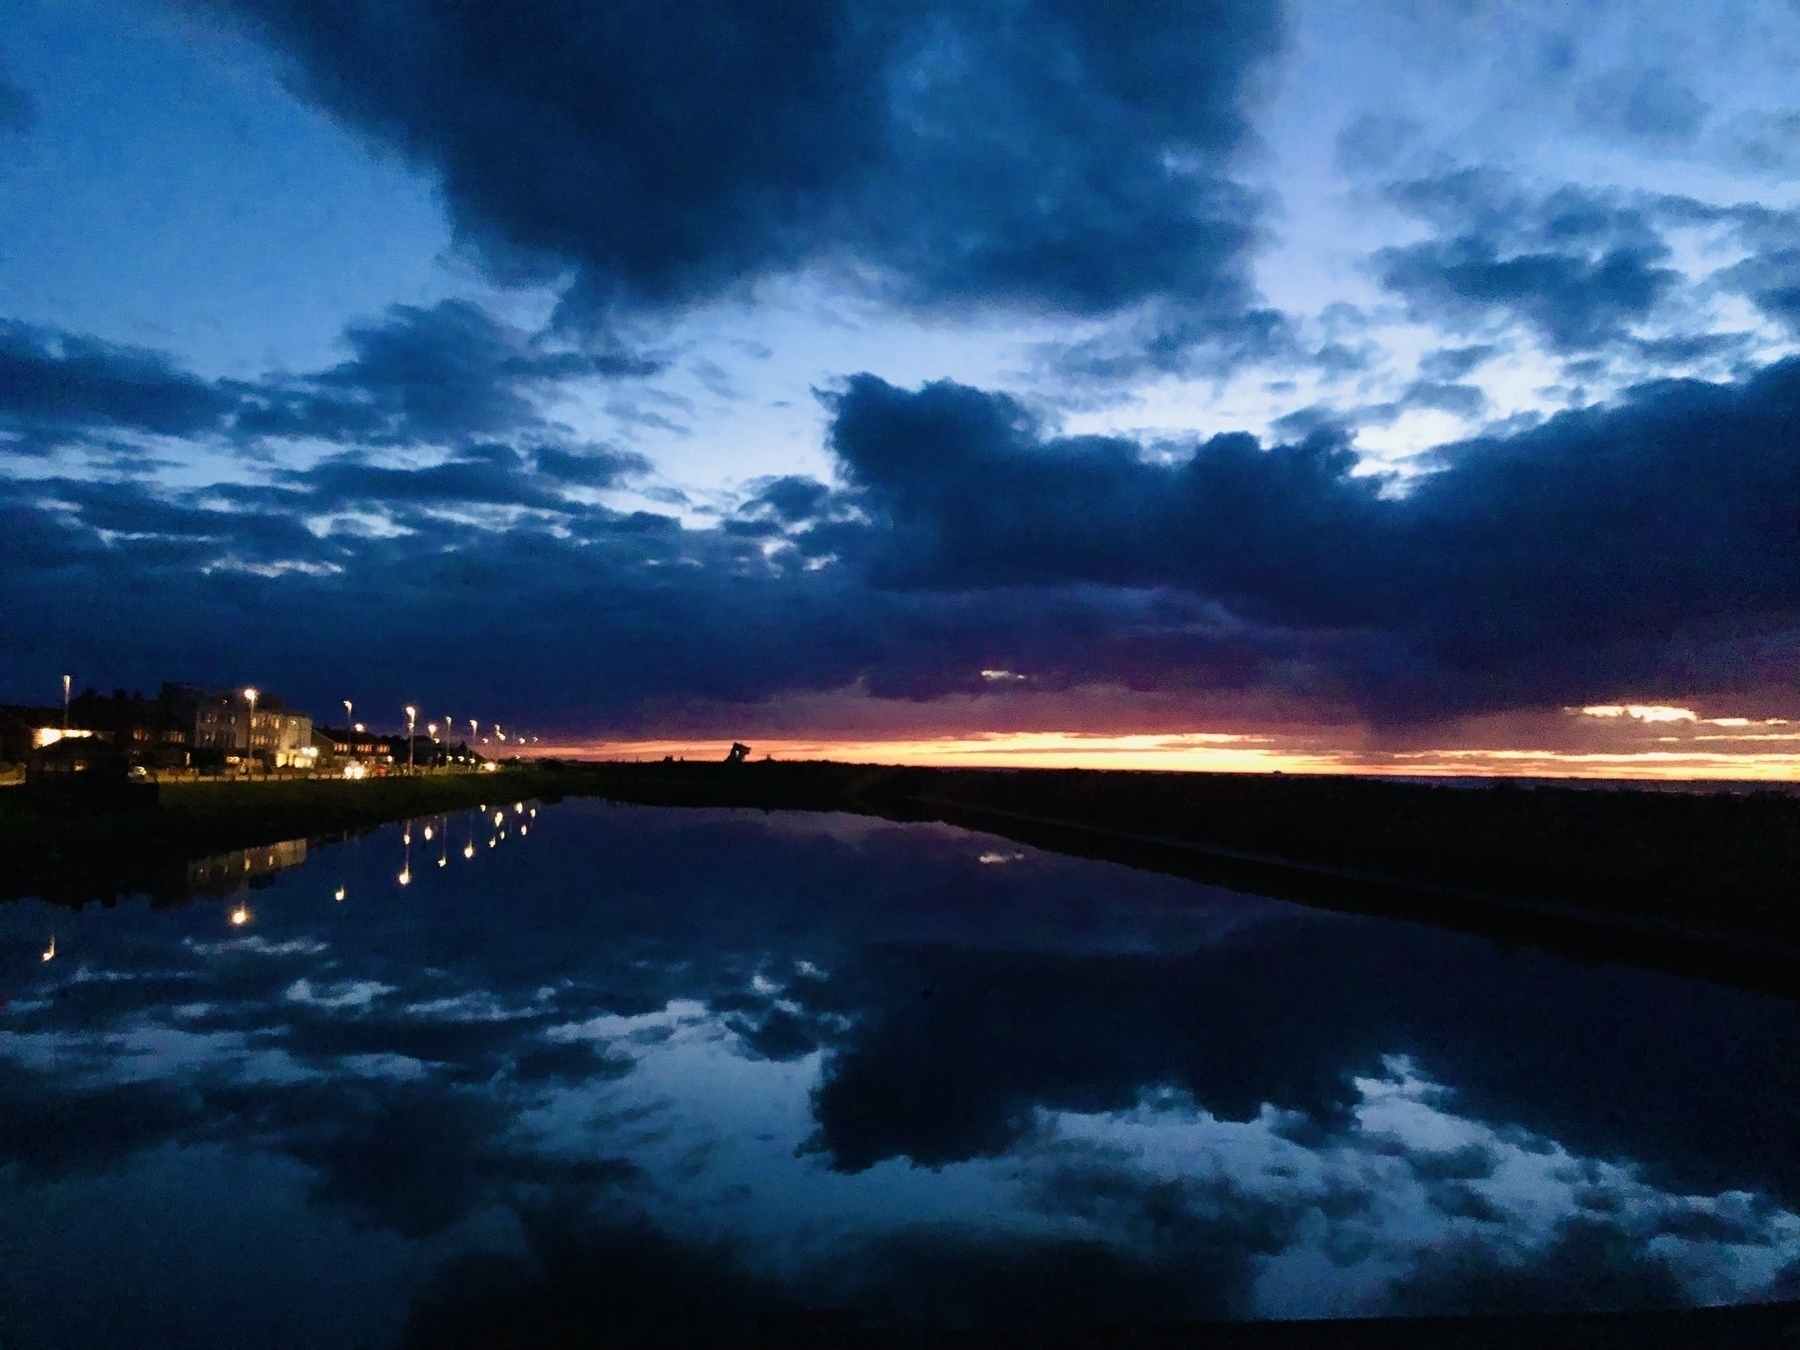 Sky and lake at sunset in a blue hue with a line of yellow on the horizon, the clouds reflect in the water along with a line of streetlights to the left of the frame